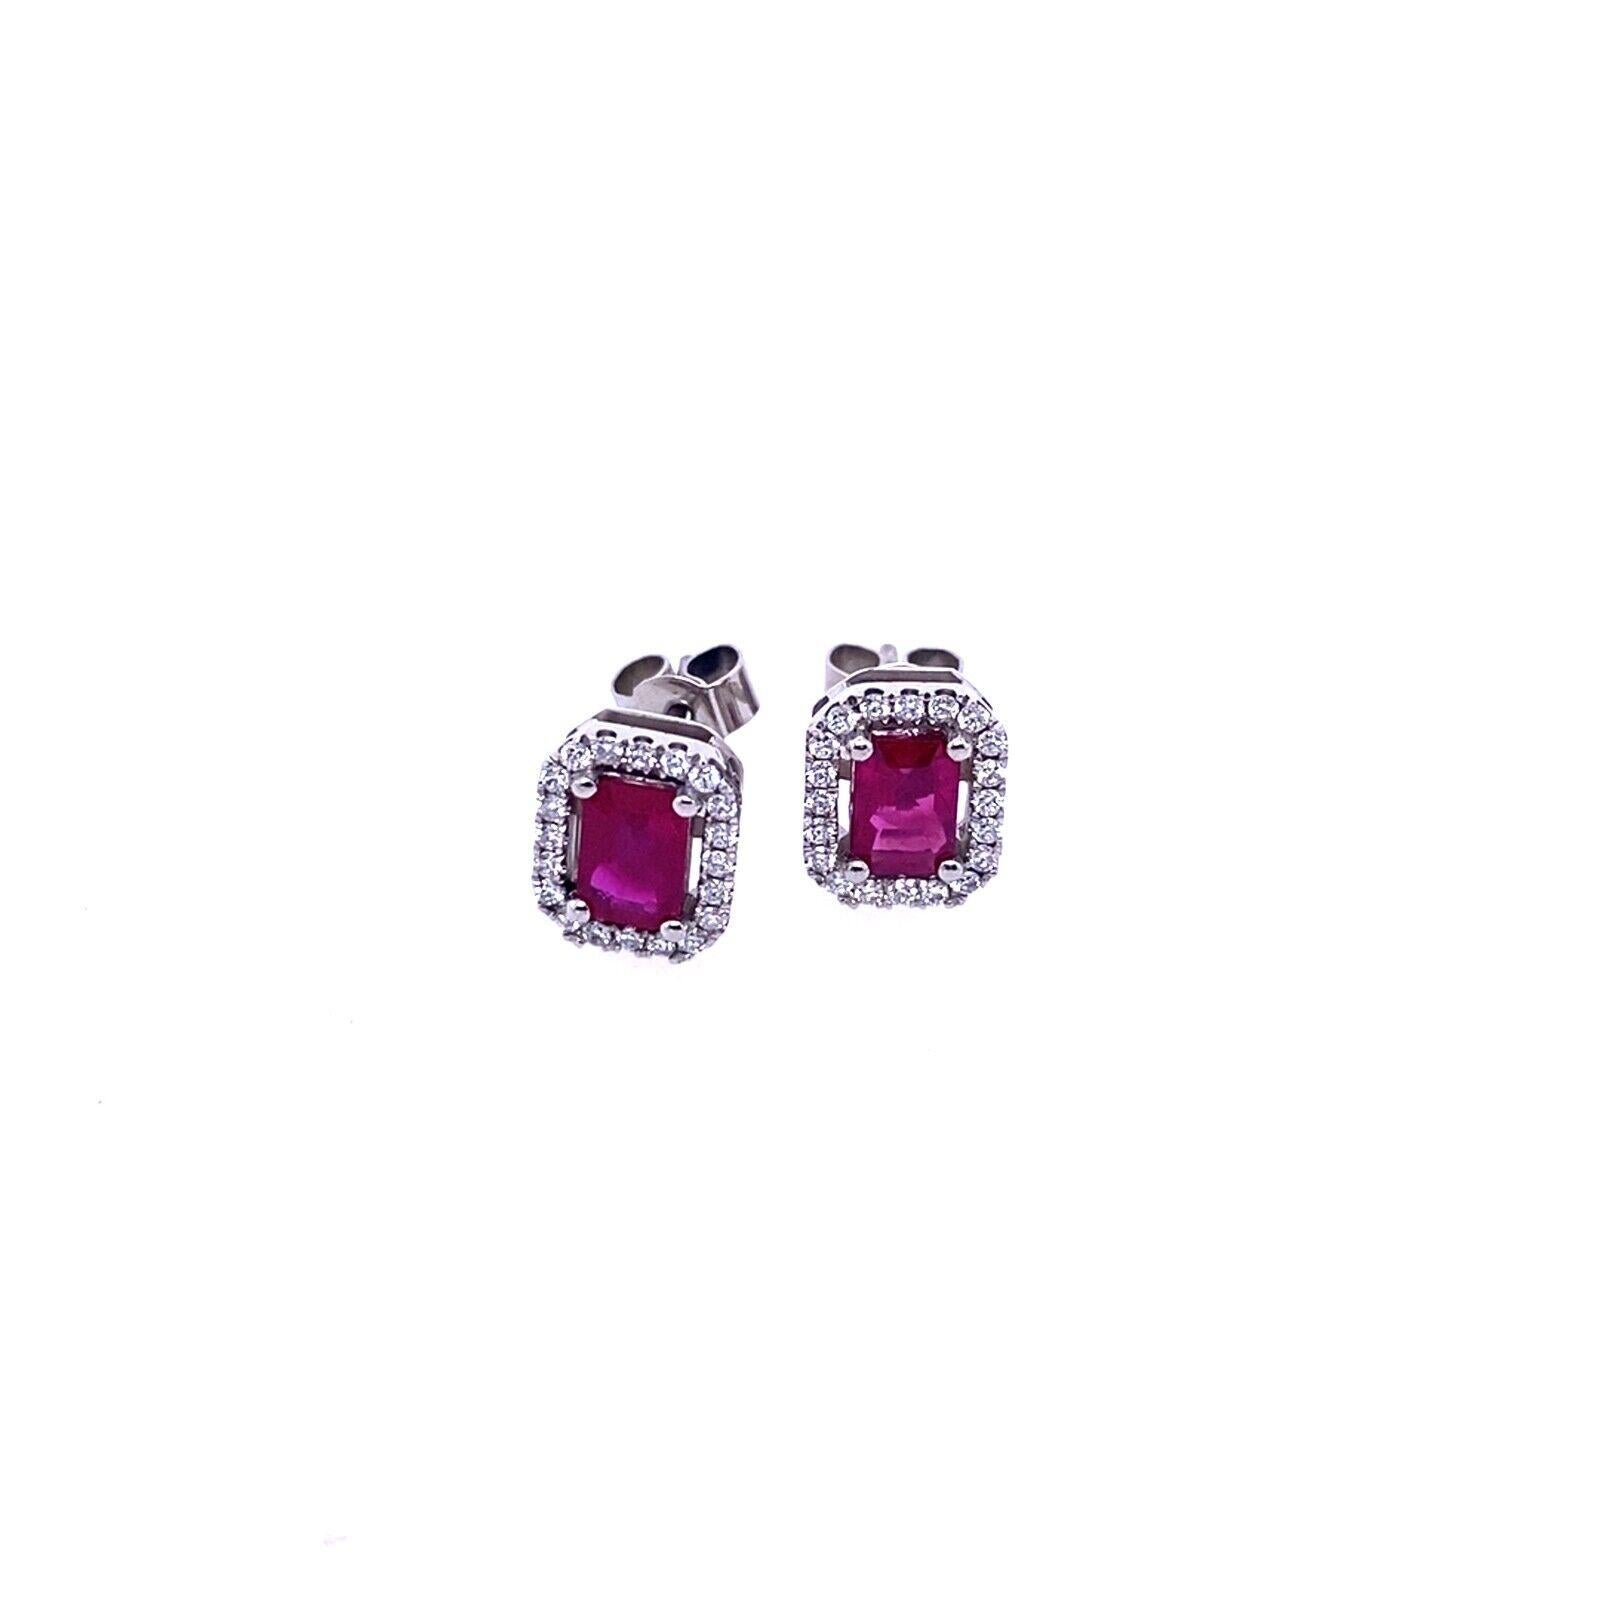 These earrings are absolutely stunning. They are surrounded by 0.33ct of F/VS Diamonds. The earrings are made out Platinum, are the perfect size and they are very elegant. You can wear them to any occasion and they will match perfectly.

Additional